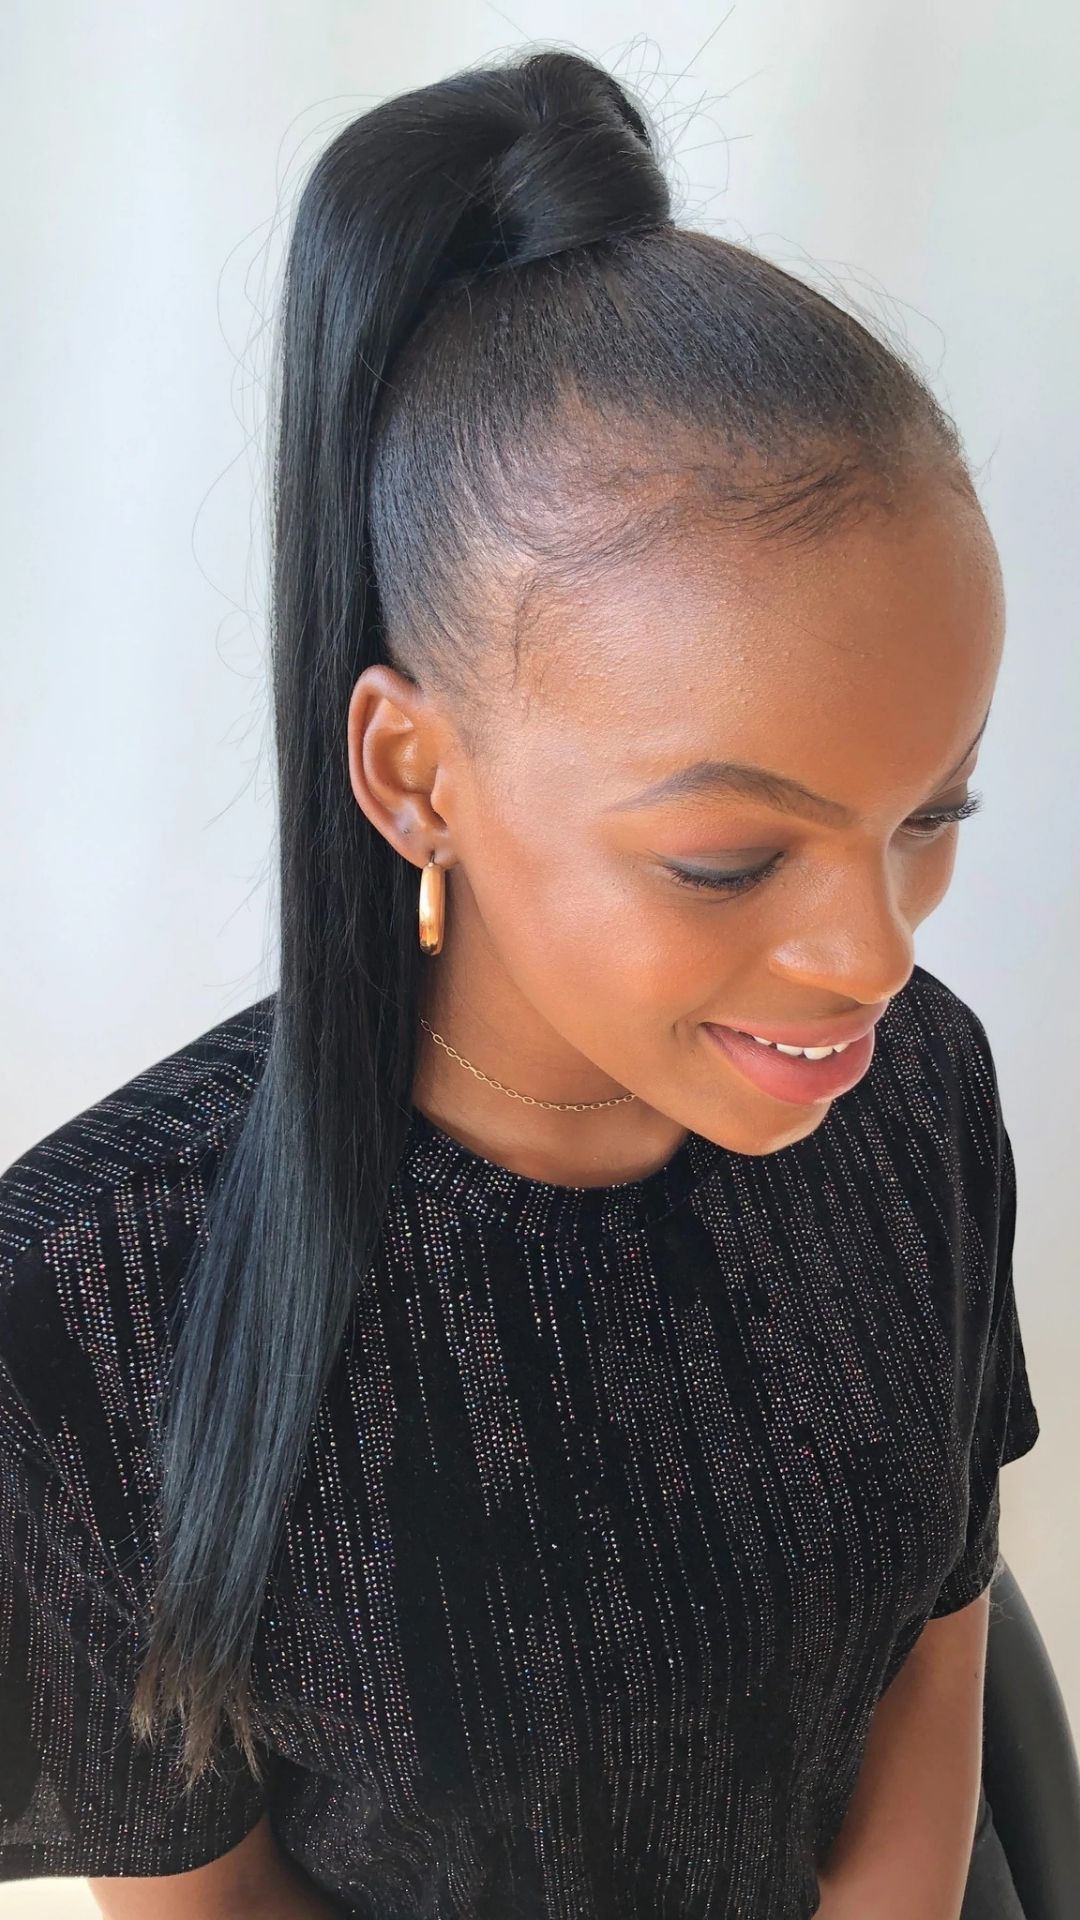 Her Hair Jet Black Ponytail - Hair Extensions South Africa